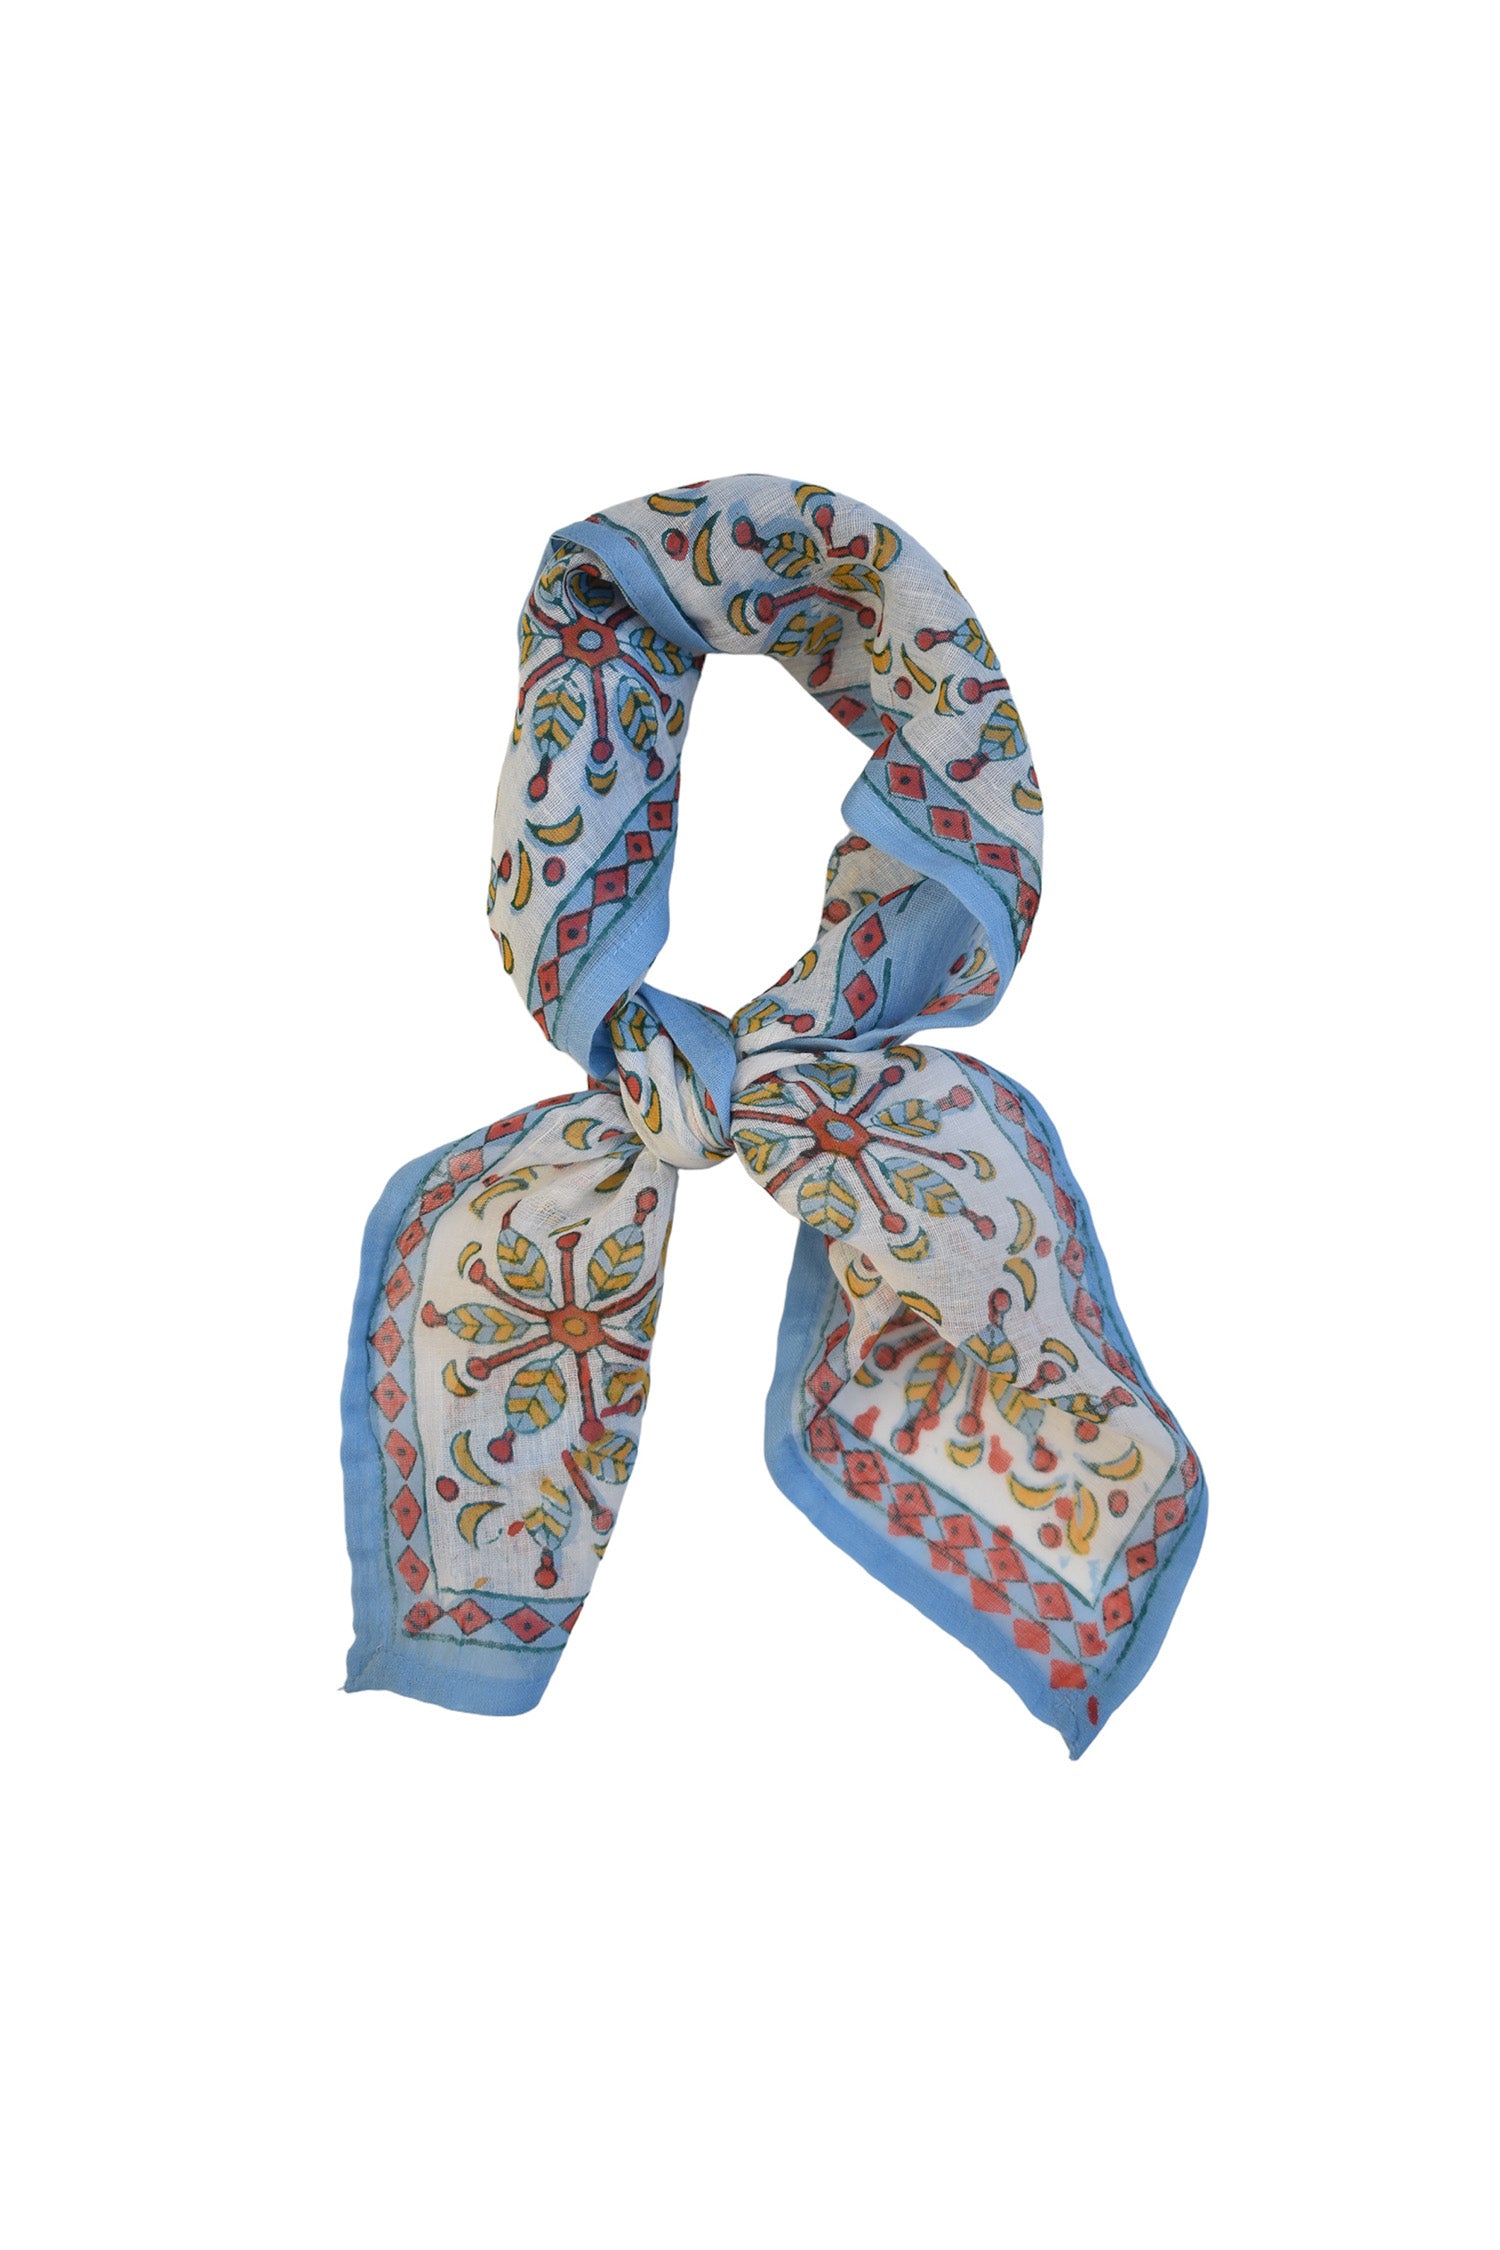 Corfu block printed floral bandana tied flat against a white background